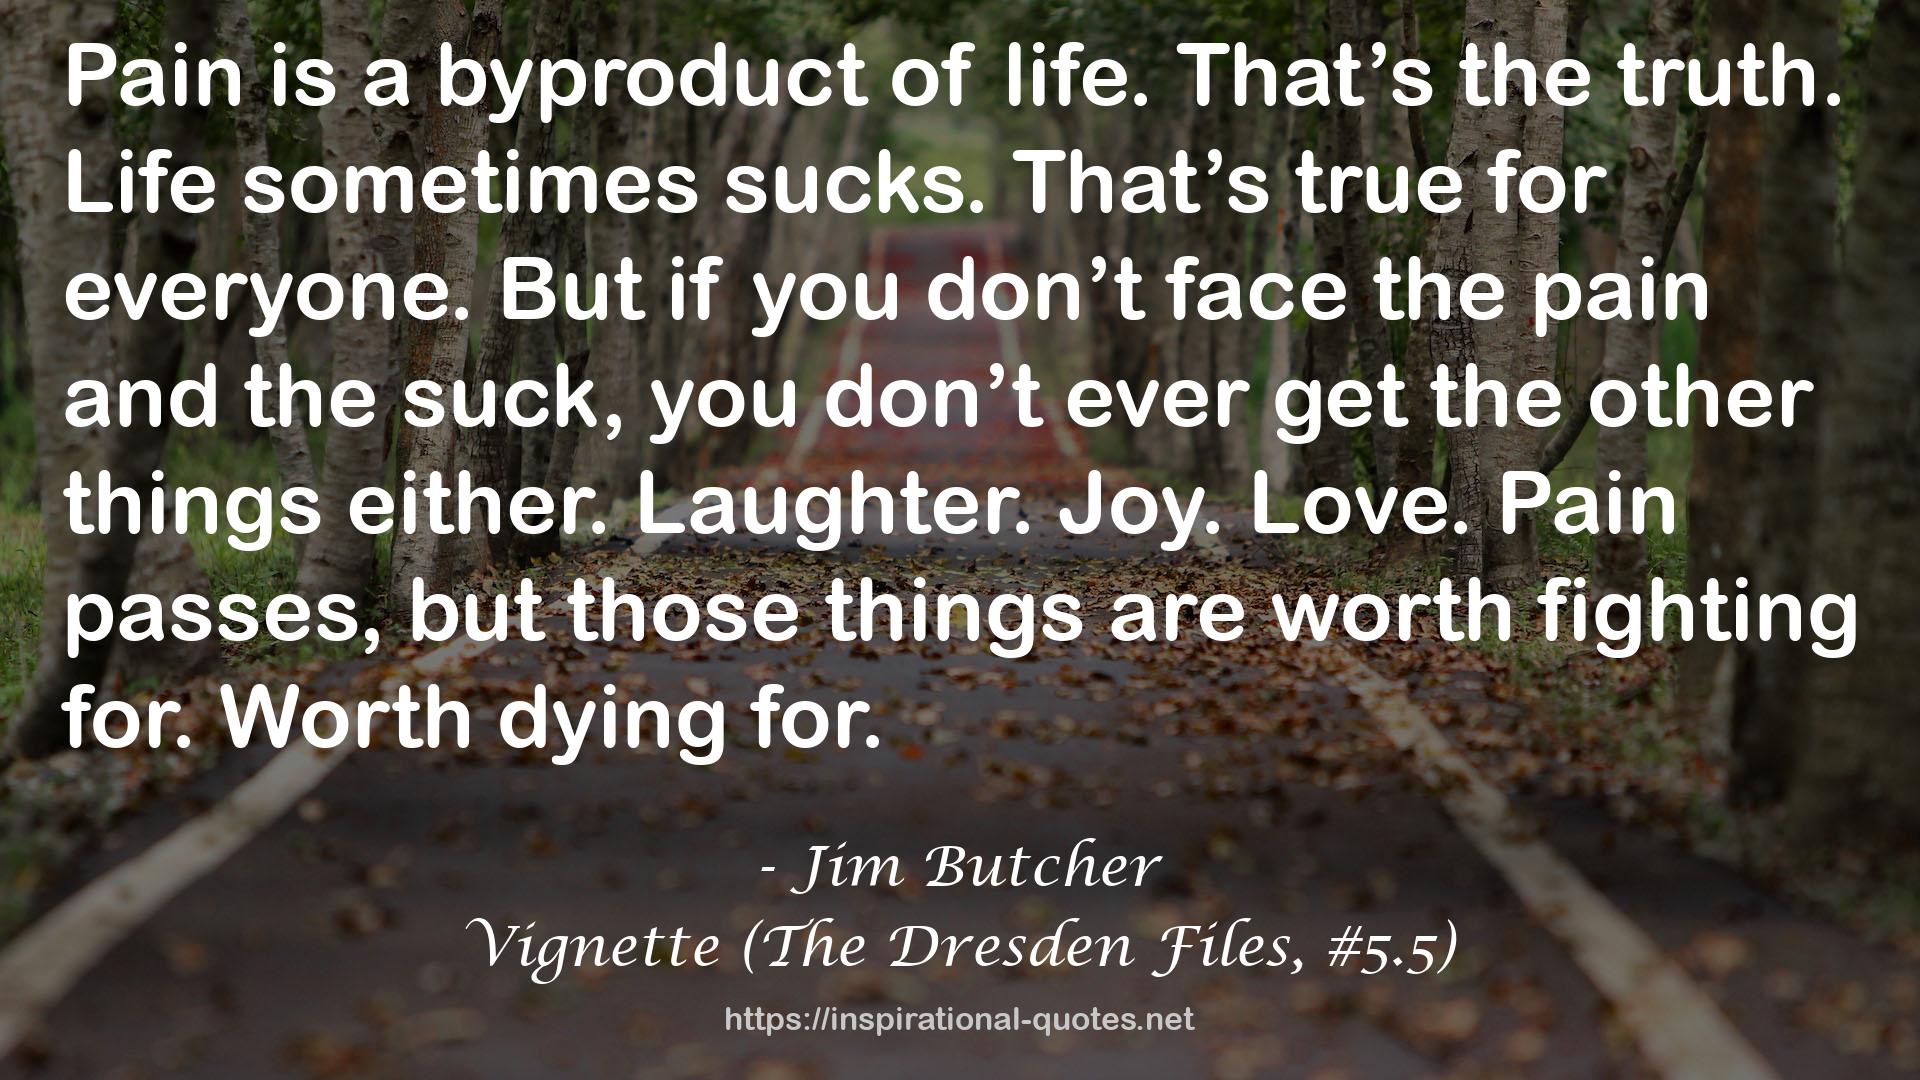 Vignette (The Dresden Files, #5.5) QUOTES